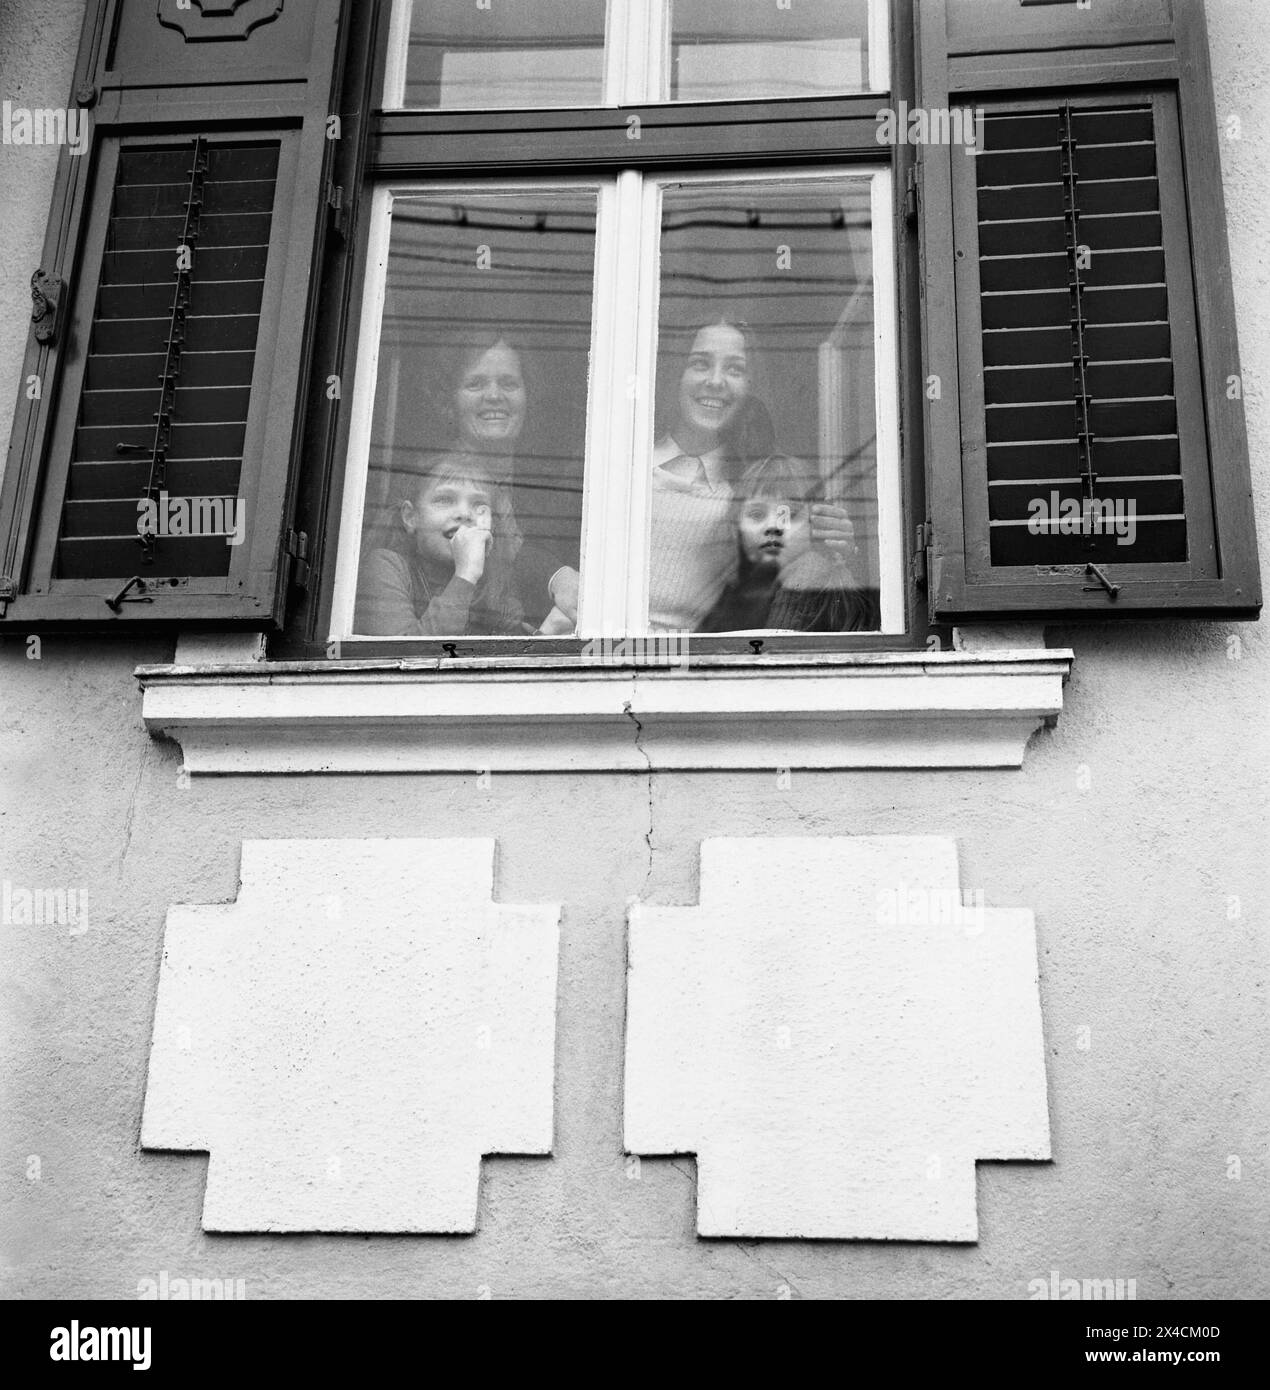 Socialist Republic of Romania in the 1970s. Women and girls in a family seen behind the glass window of their house, looking out. Stock Photo